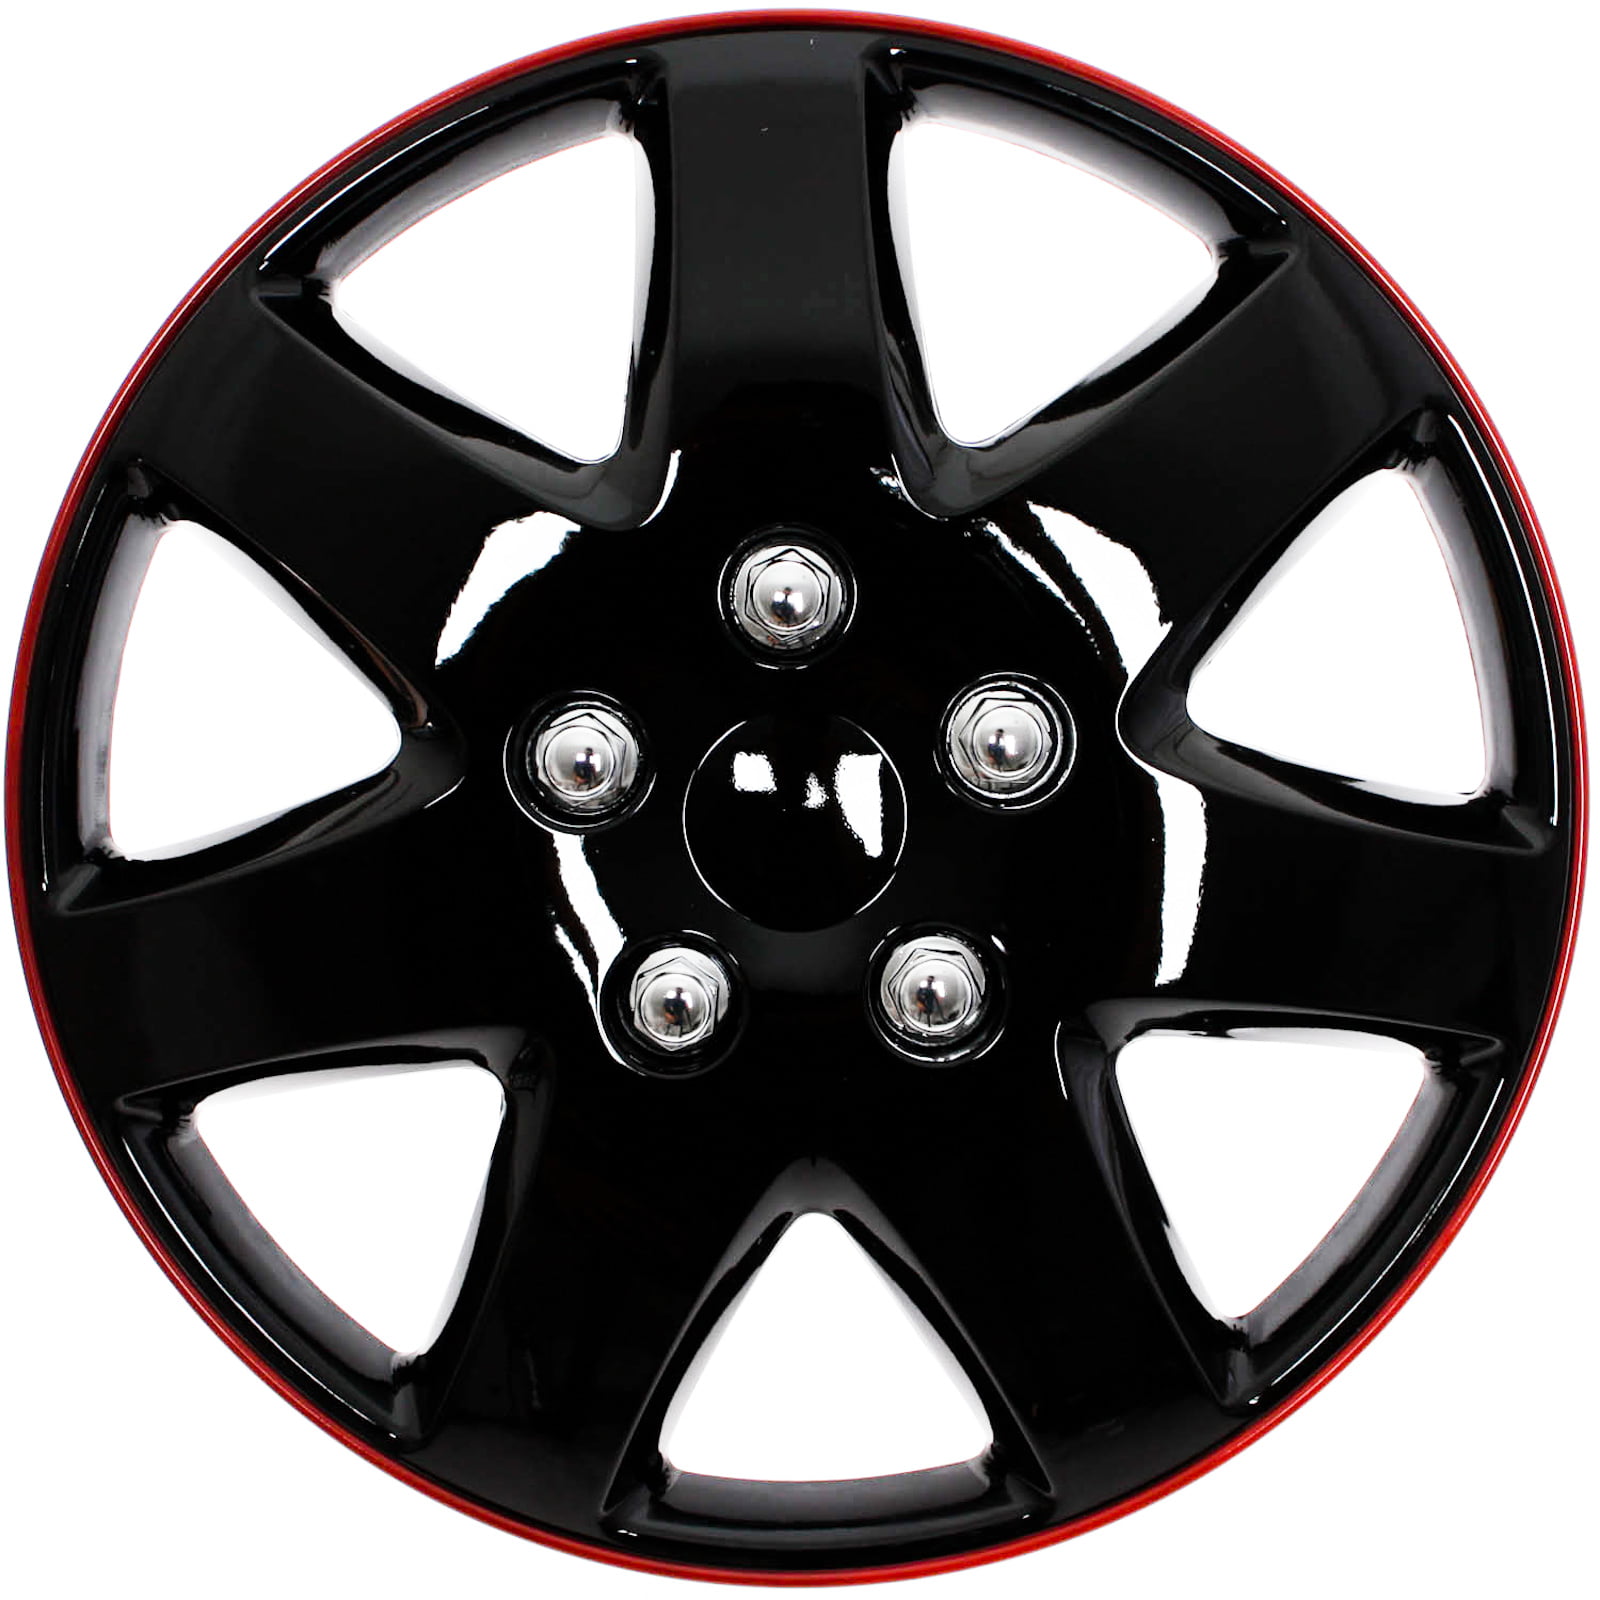 Drive Accessories KT-962-15IB+R Toyota Paseo 15 Ice Black Replica Wheel Cover, Set of 4 